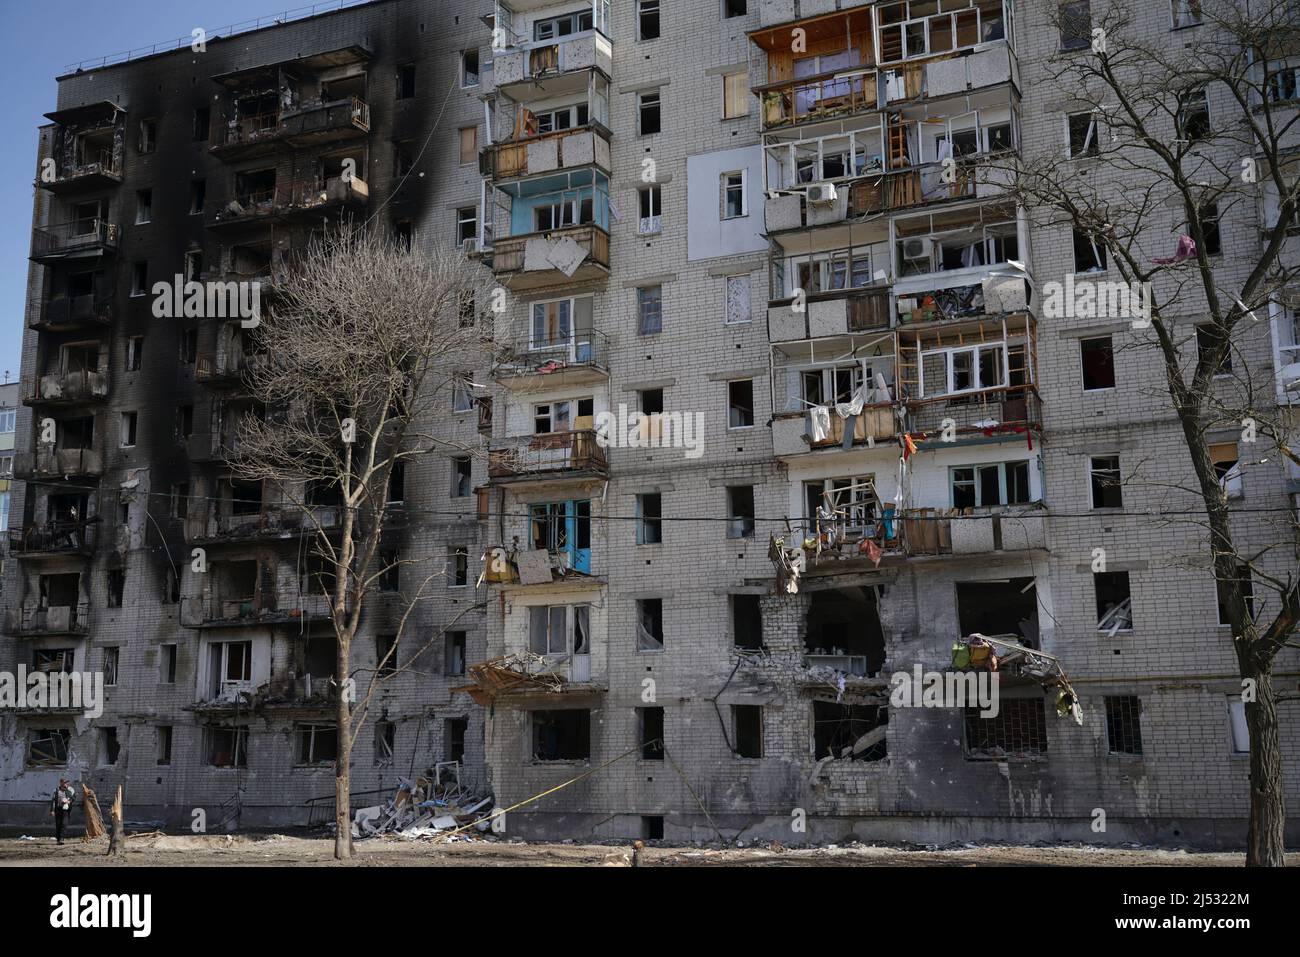 A destroyed residential building in the city that was damaged by a shell explosion during the war in Ukraine. House without windows. Stock Photo